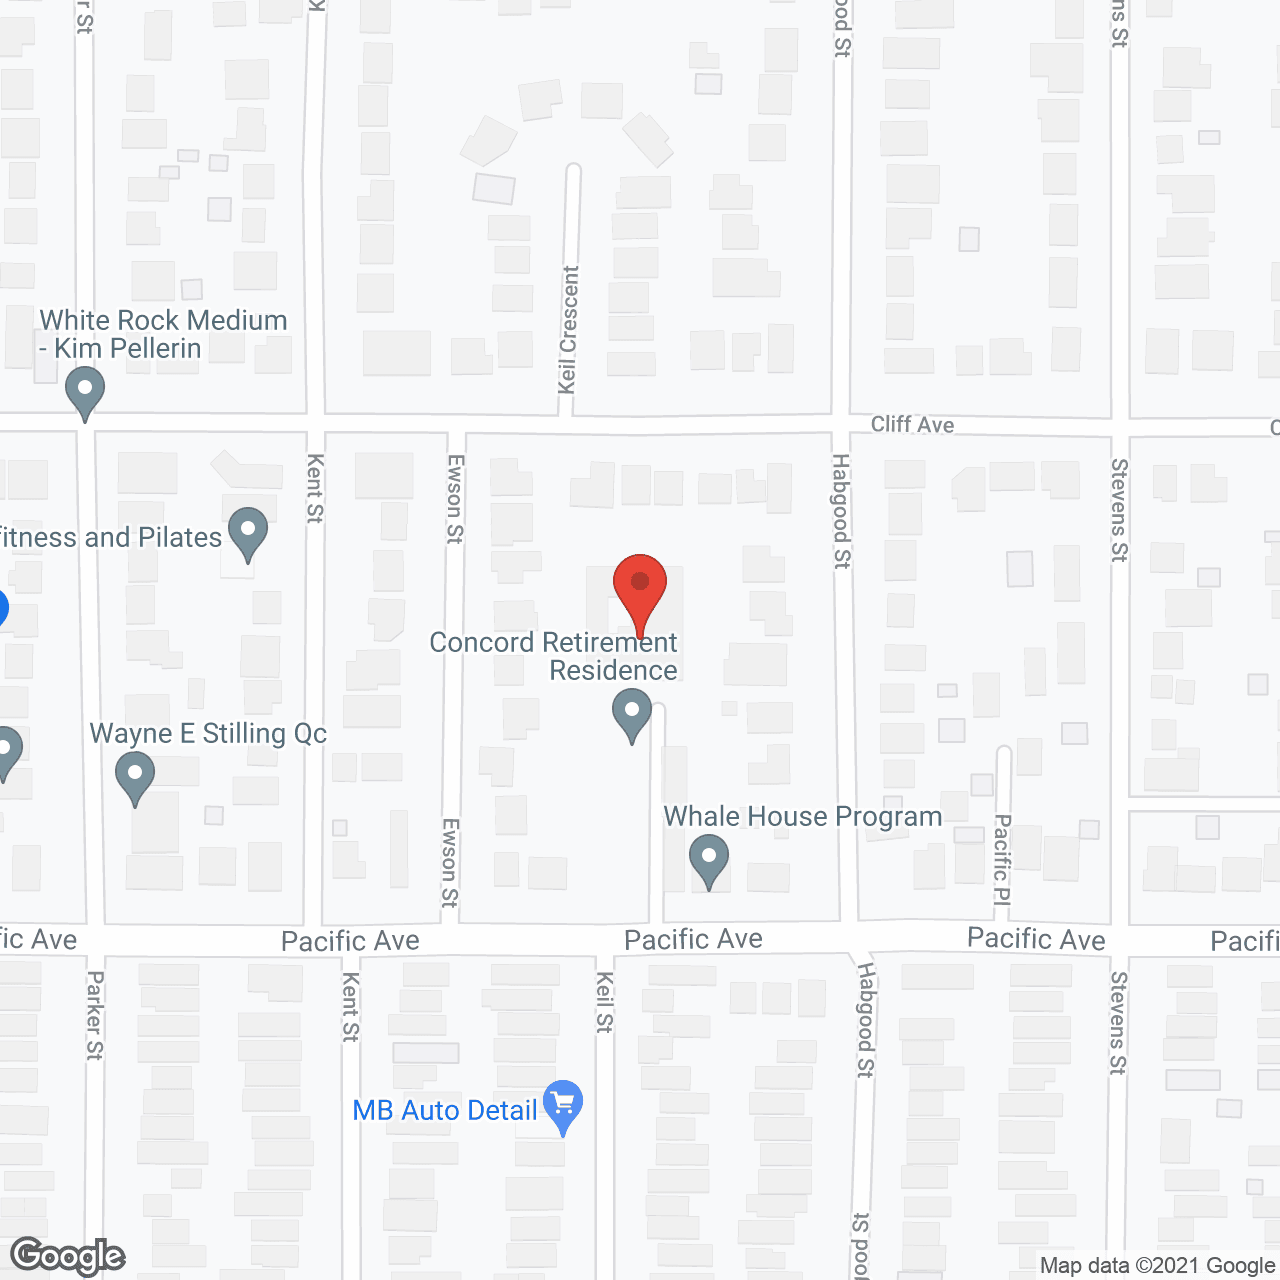 Concord Retirement Residences in google map